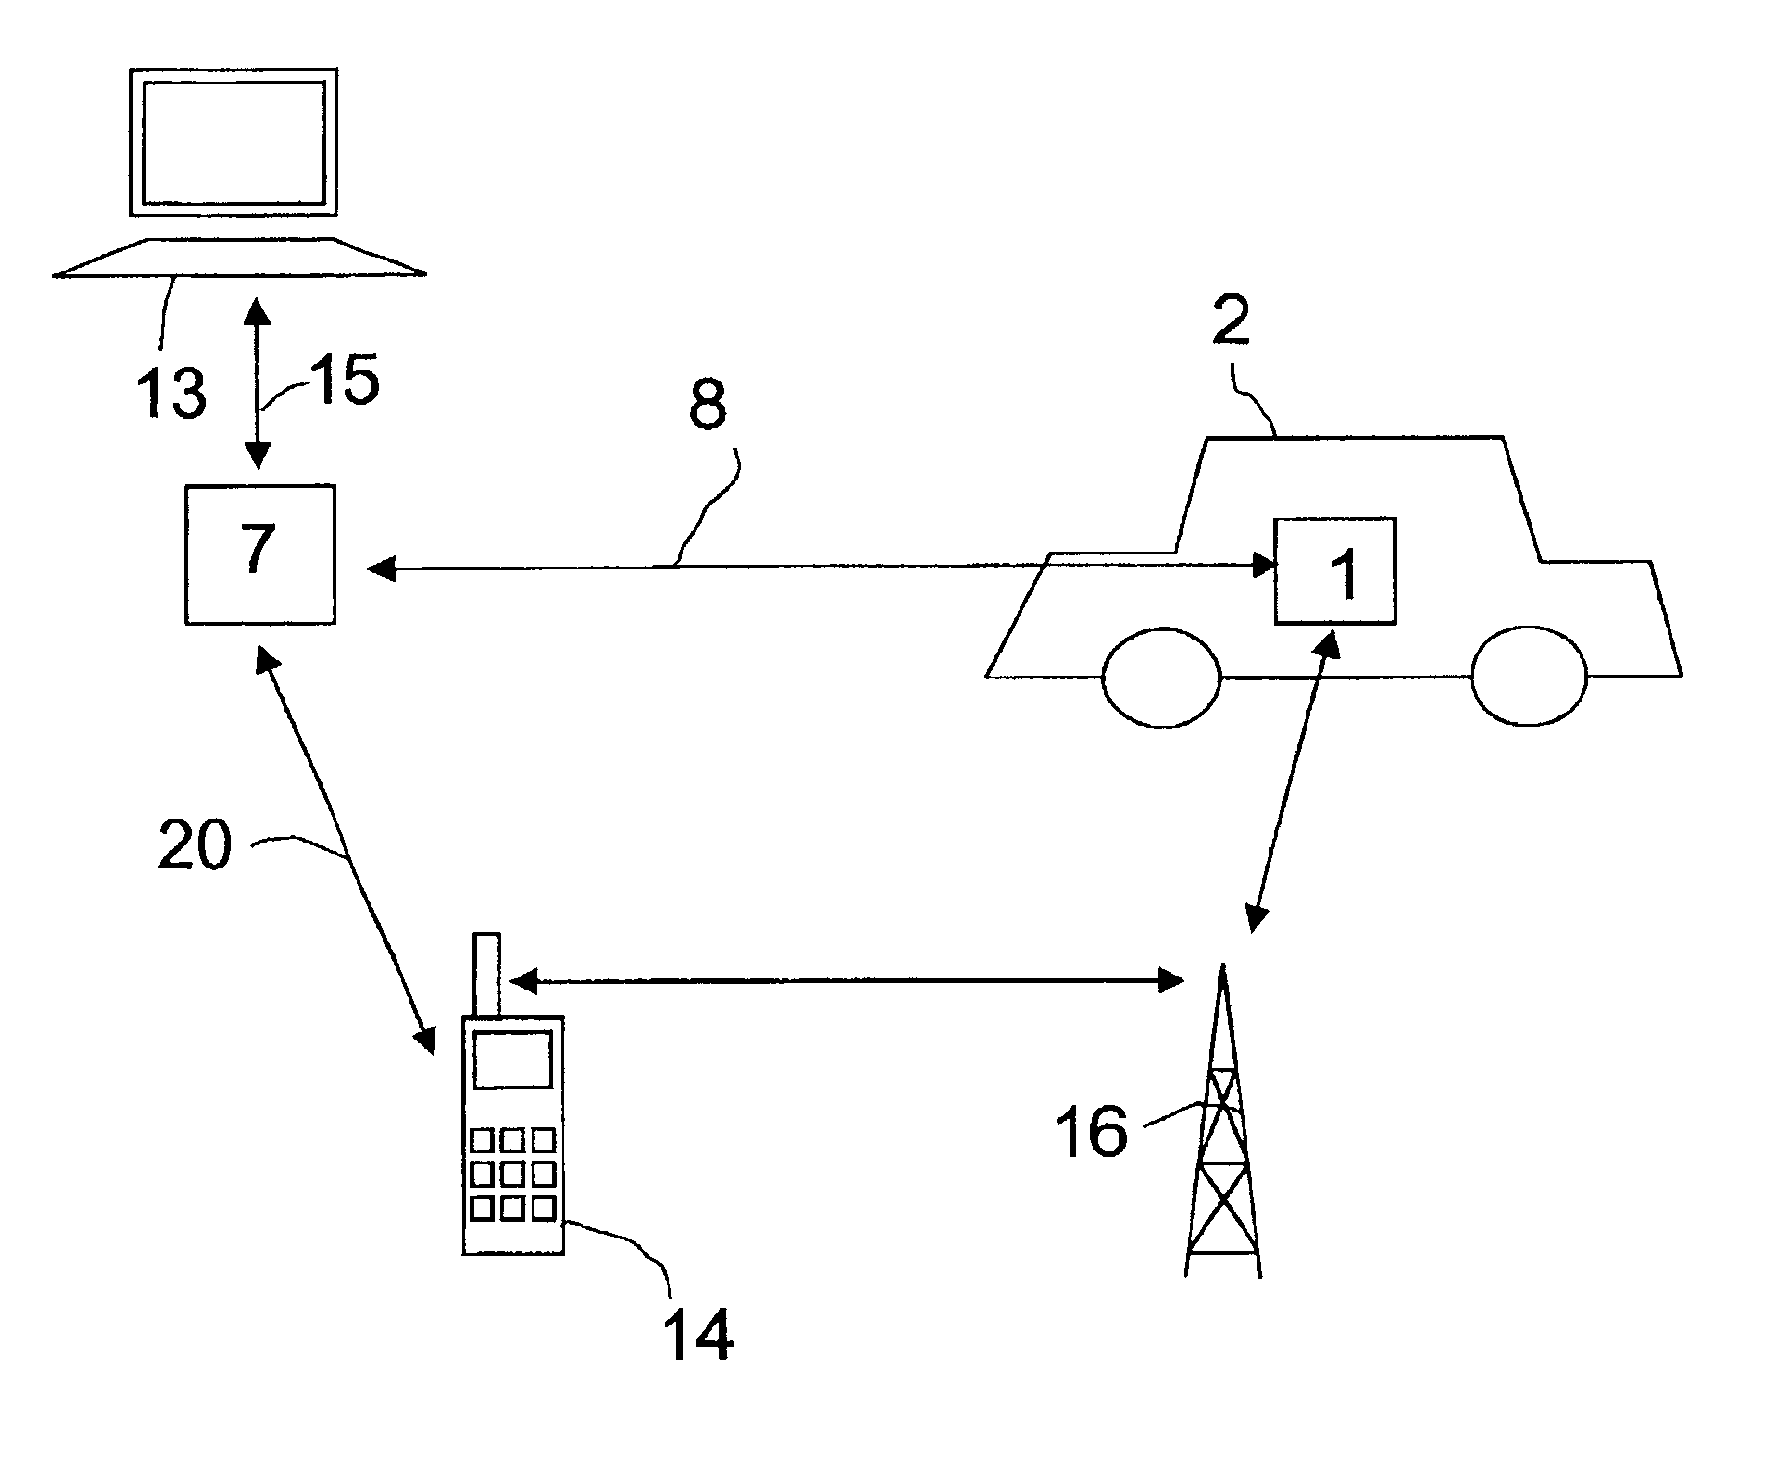 Remote communication system for use with a vehicle